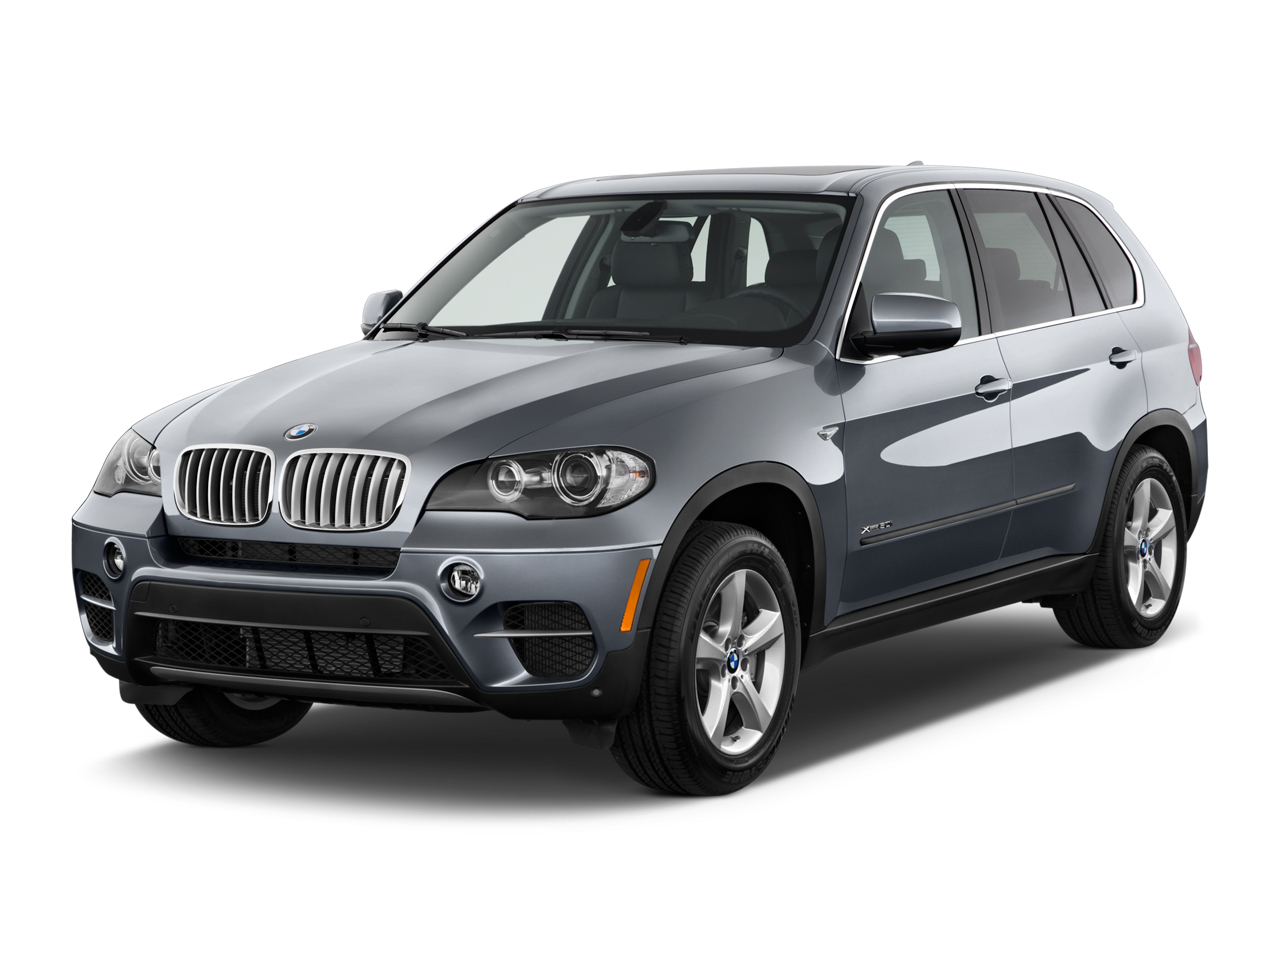 2011 BMW X5 Review, Ratings, Specs, Prices, and Photos - The Car Connection